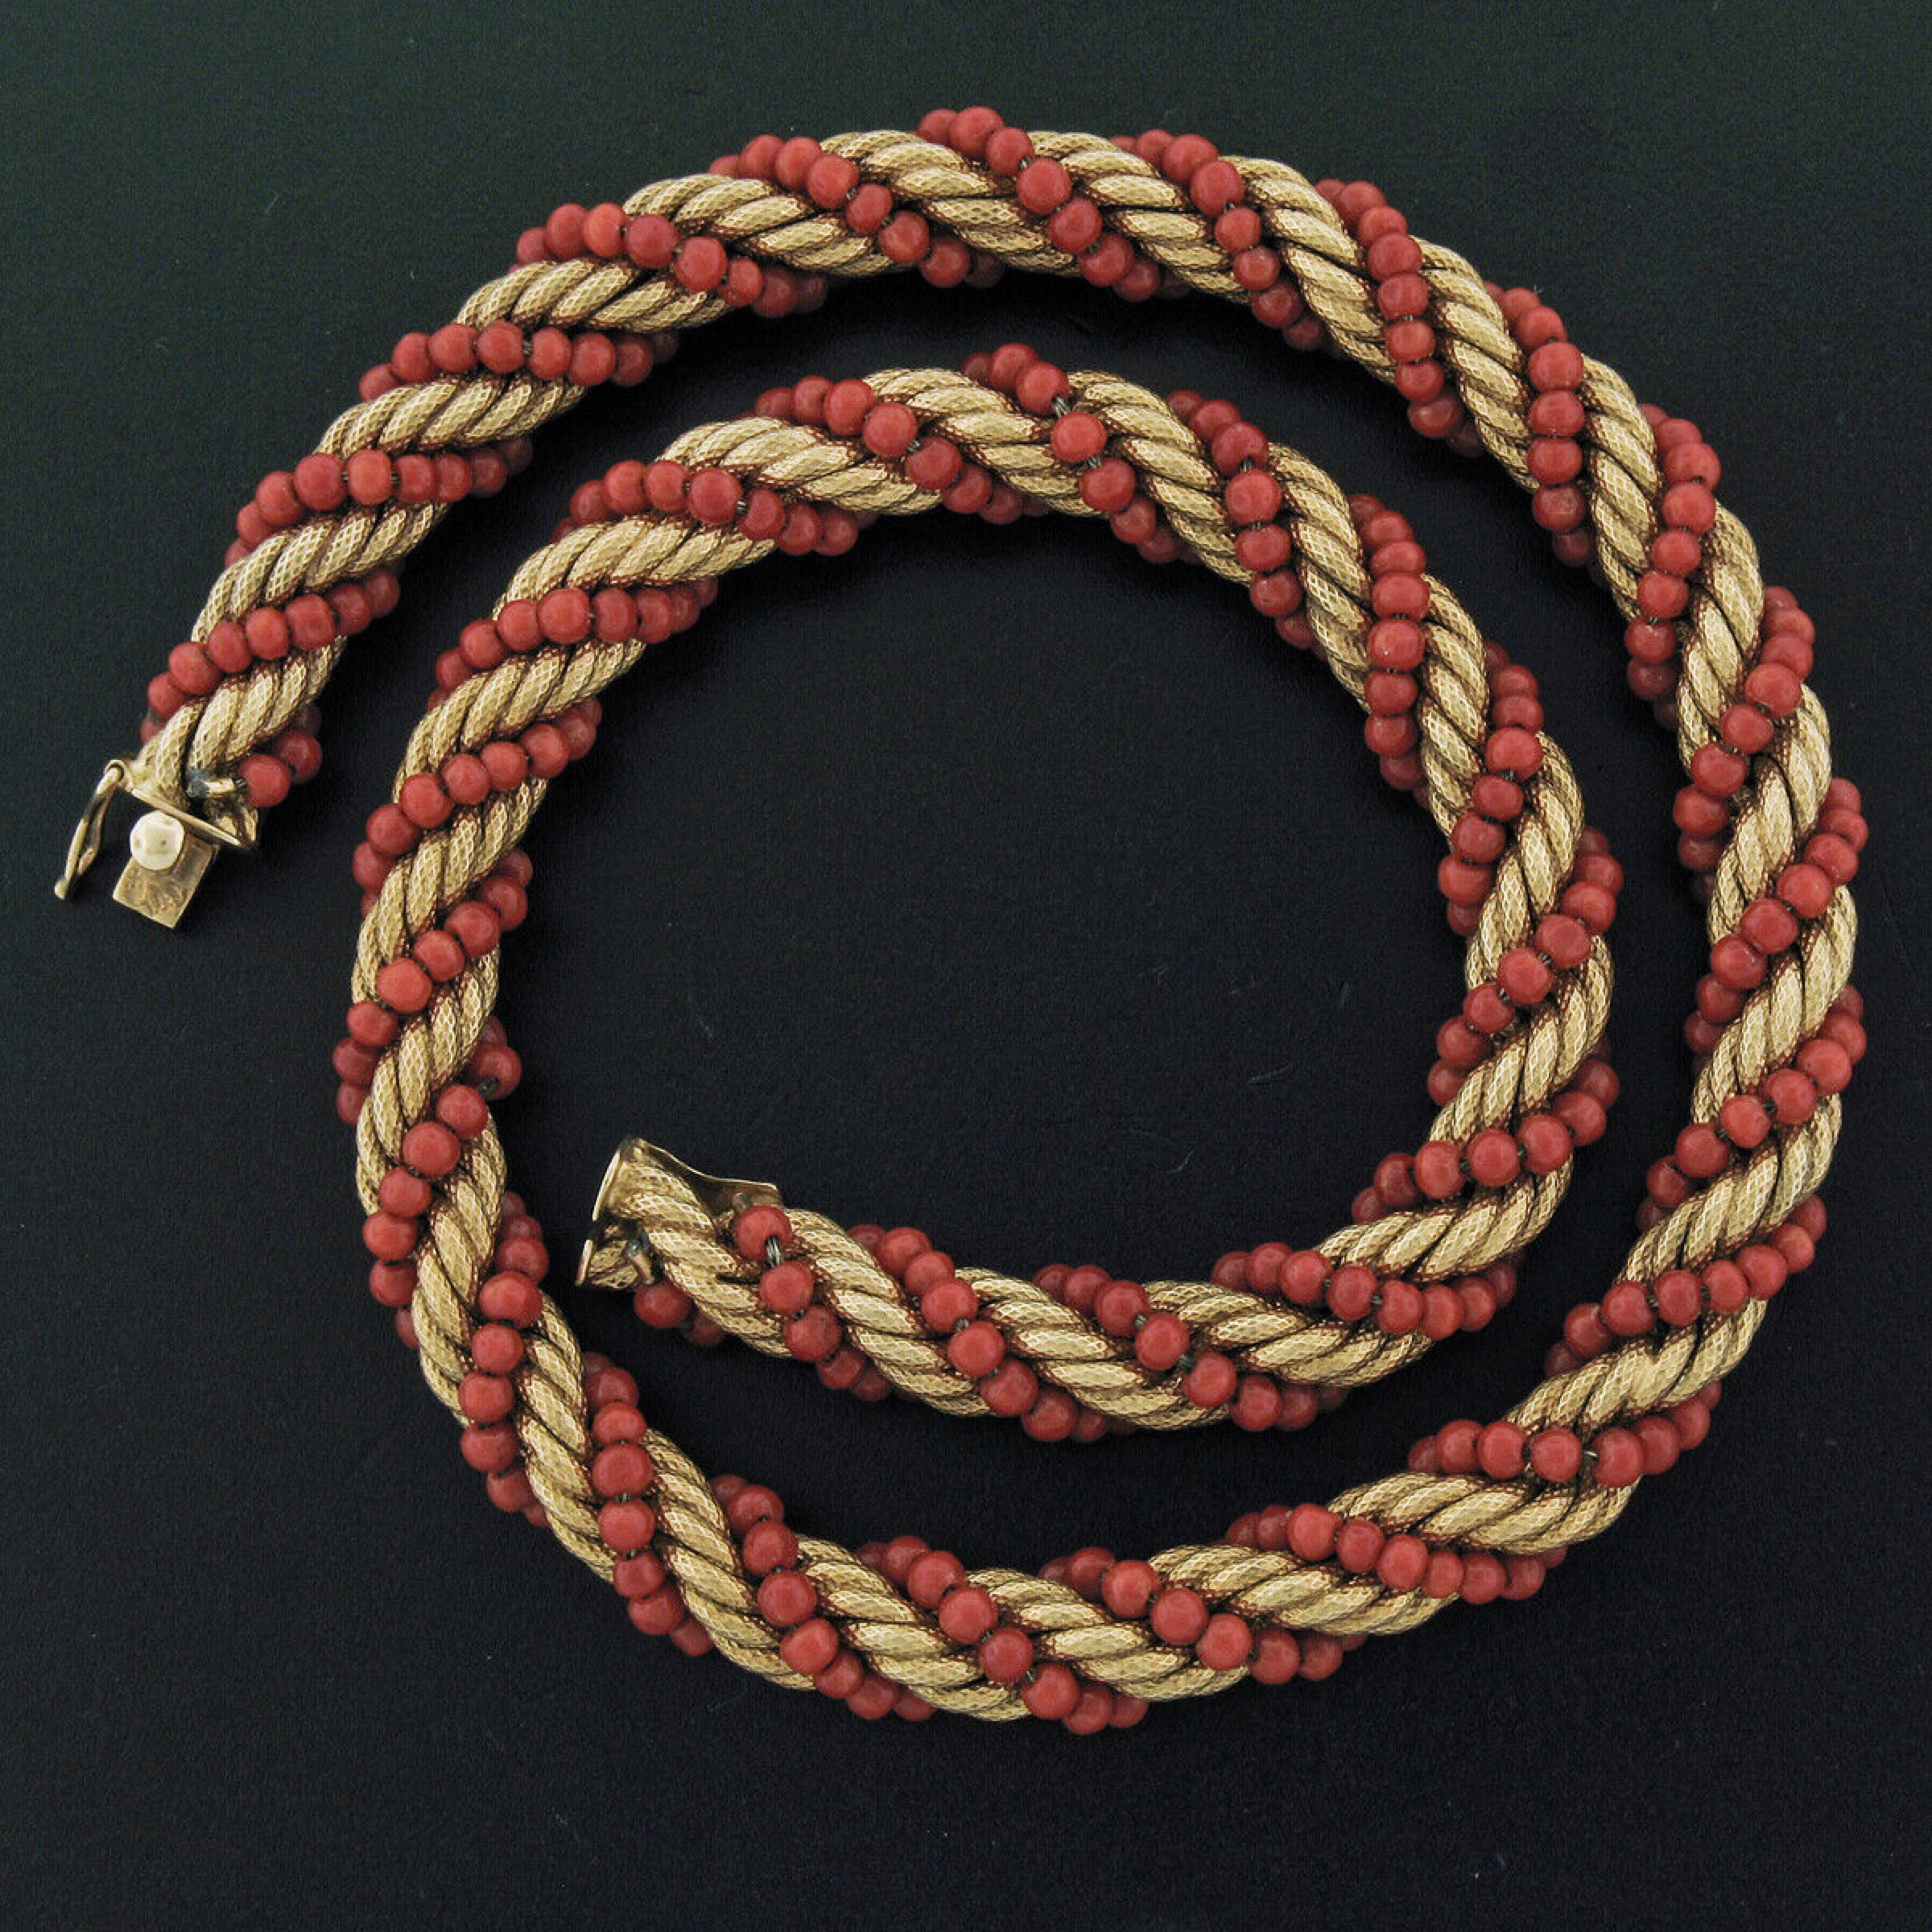 Here we have a vintage intertwined 14k yellow gold rope link and natural coral bead strand. The rope chain has a unique textured finish and displays very lovely patina which has been preserved adding an authentic vintage touch to the design. The